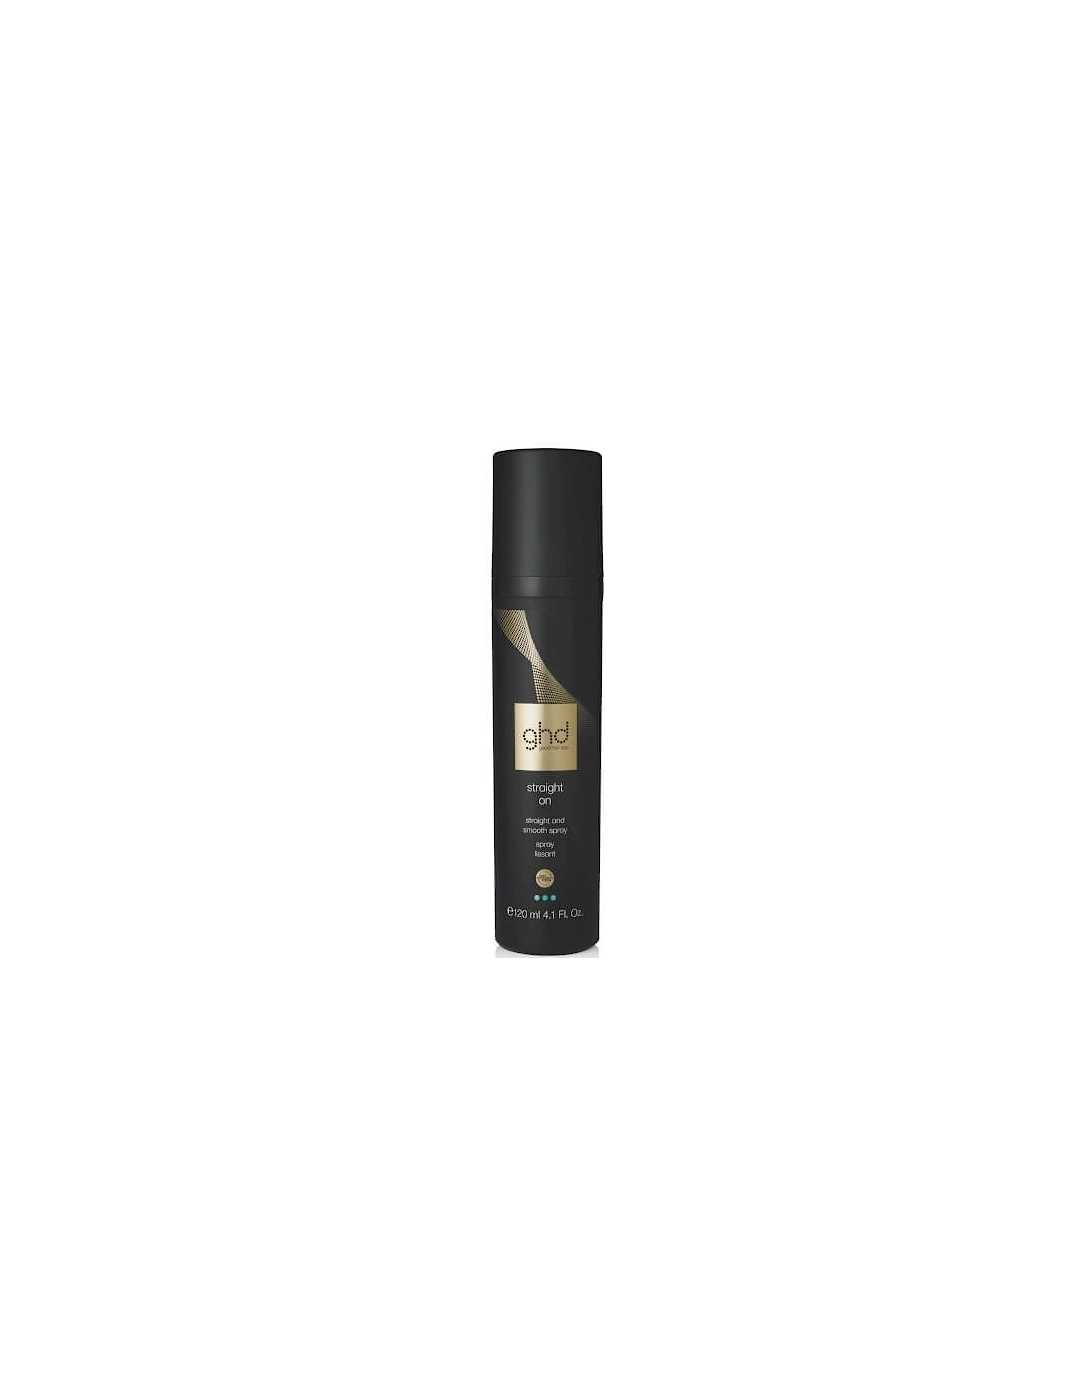 Straight on Straight and Smooth Spray 120ml - ghd, 2 of 1